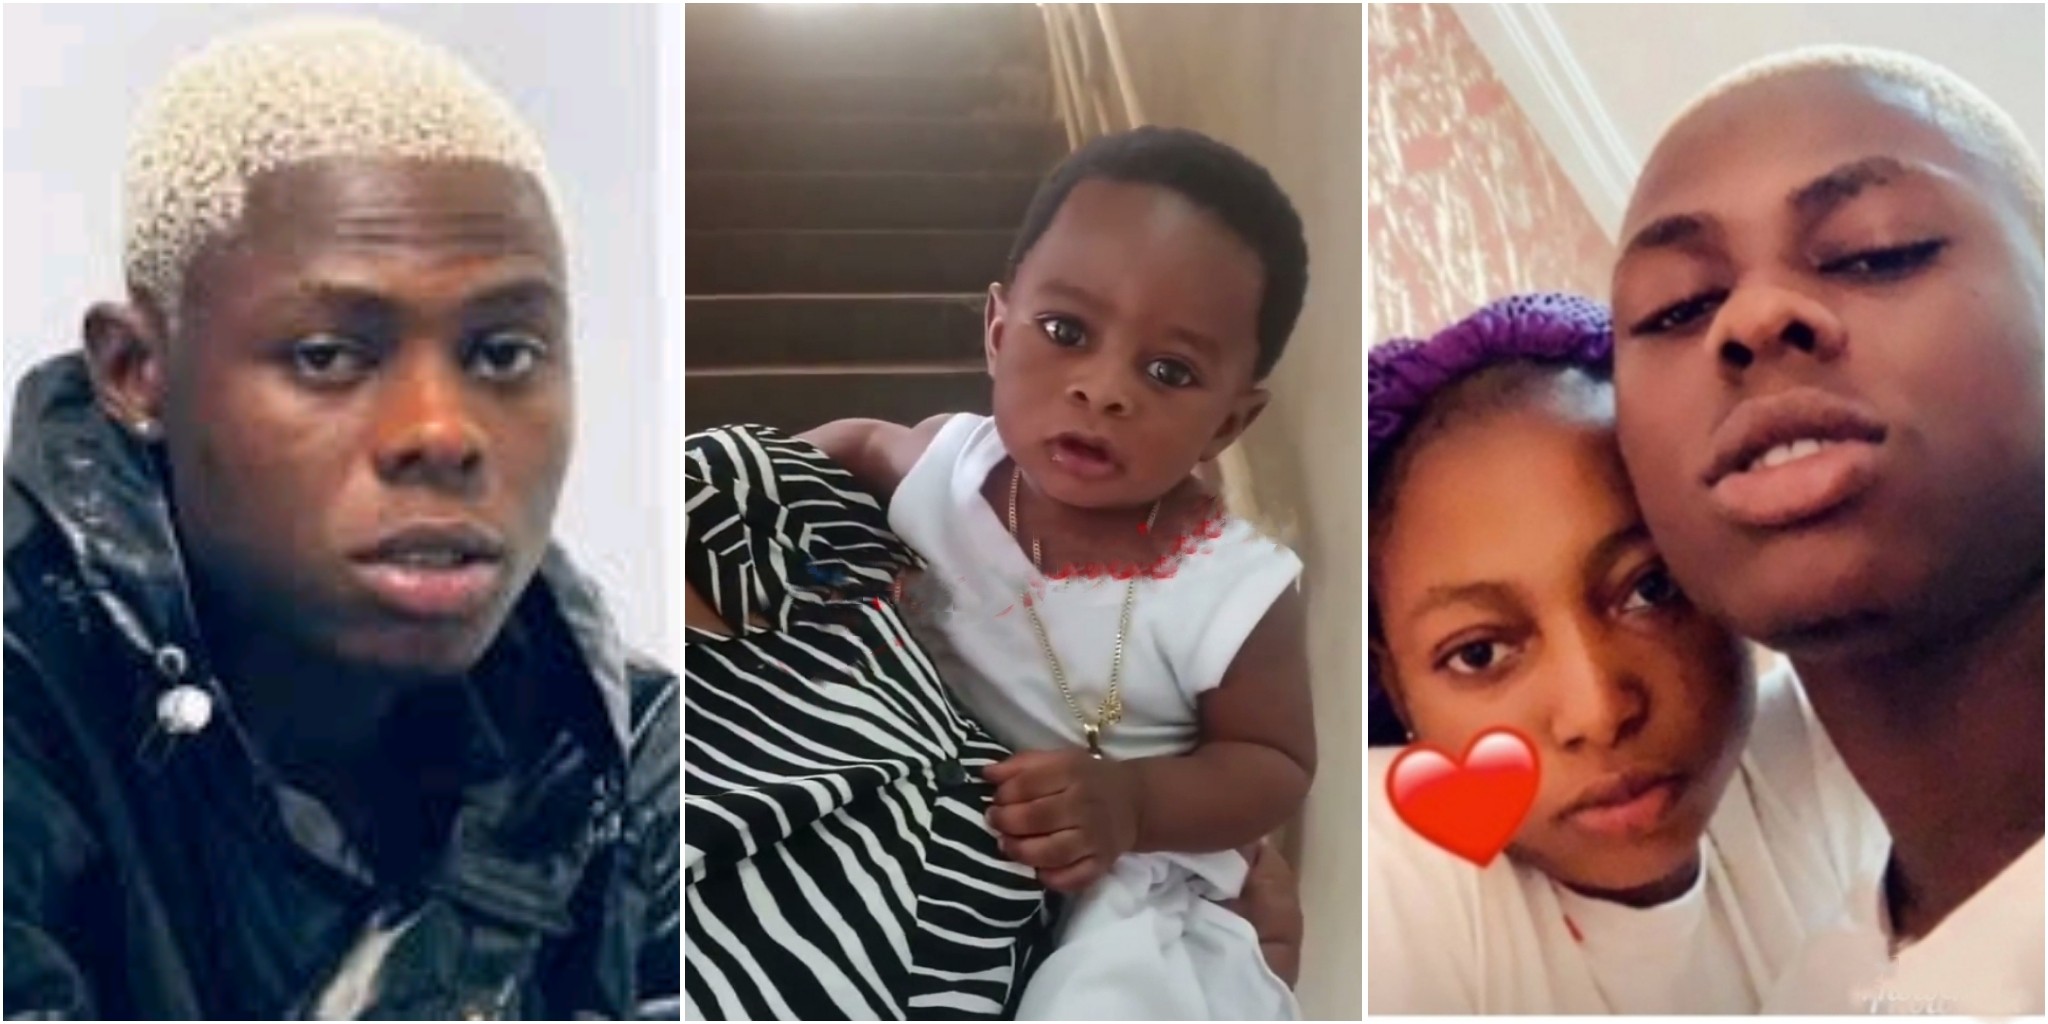 “Mohbad’s carbon copy” – Fans react to new video of Singer’s son, tackle those calling for DNA